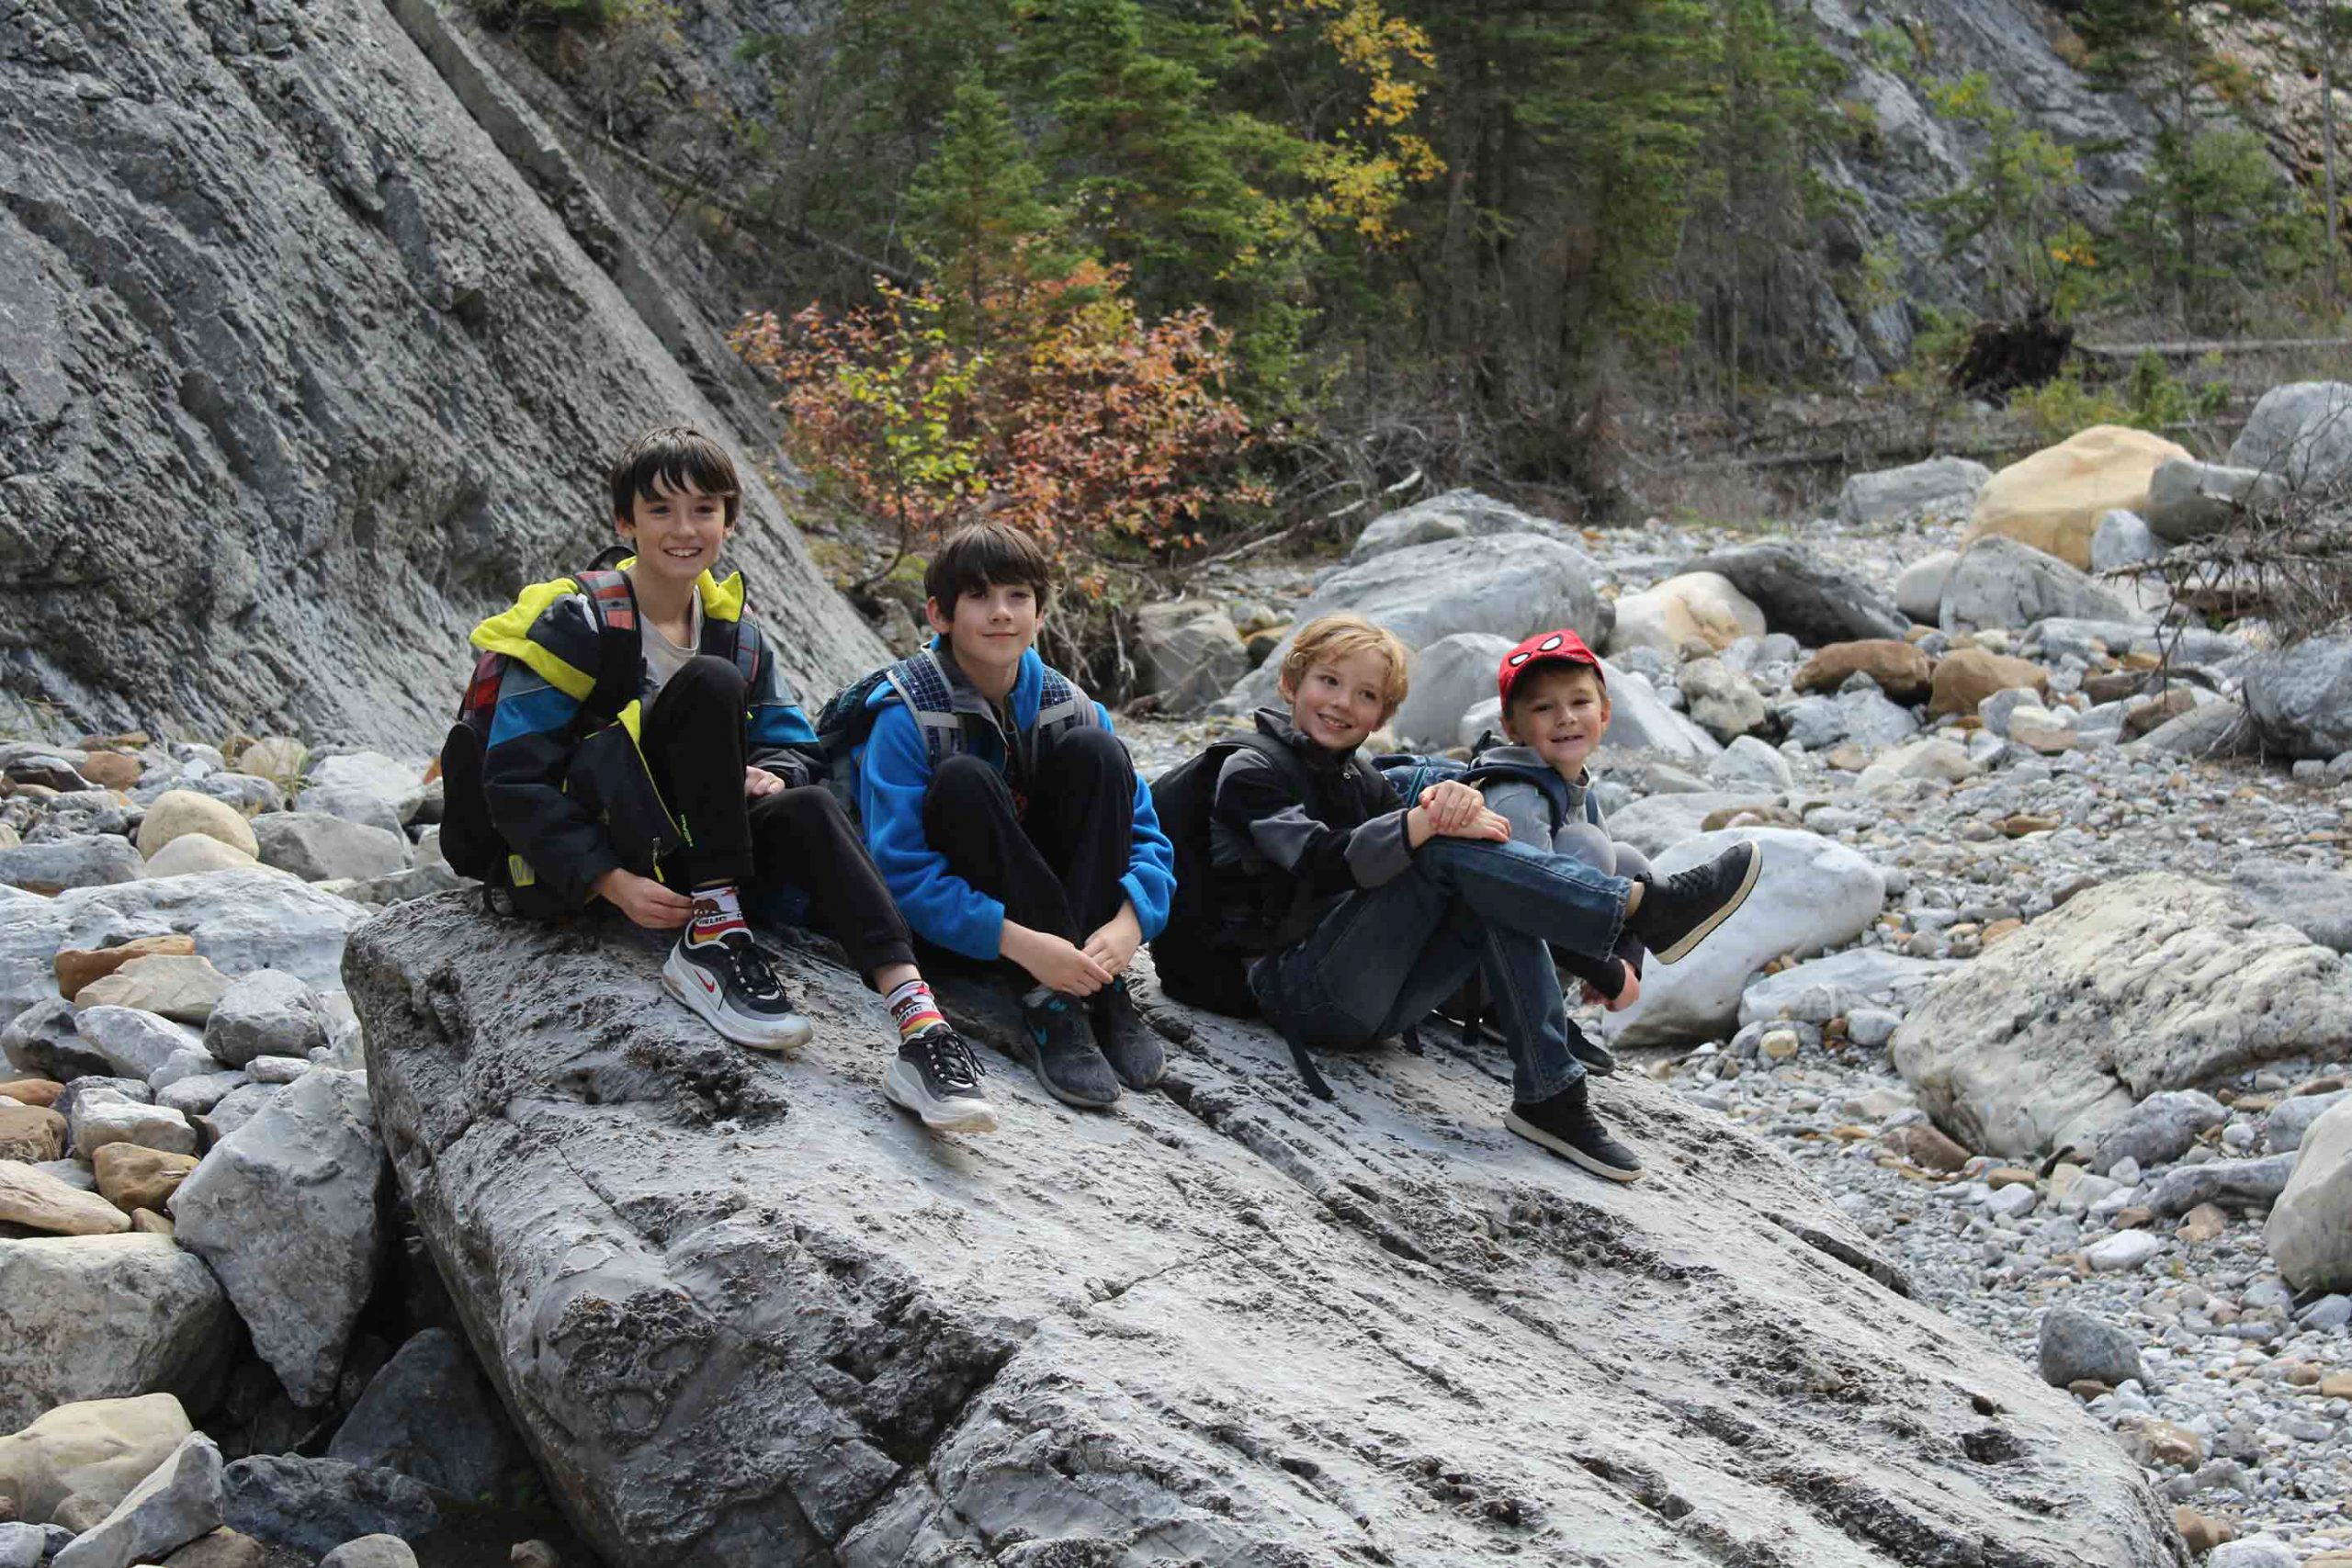 Banbury students take a break sitting on a rock during a hike along heart creek in the rockies